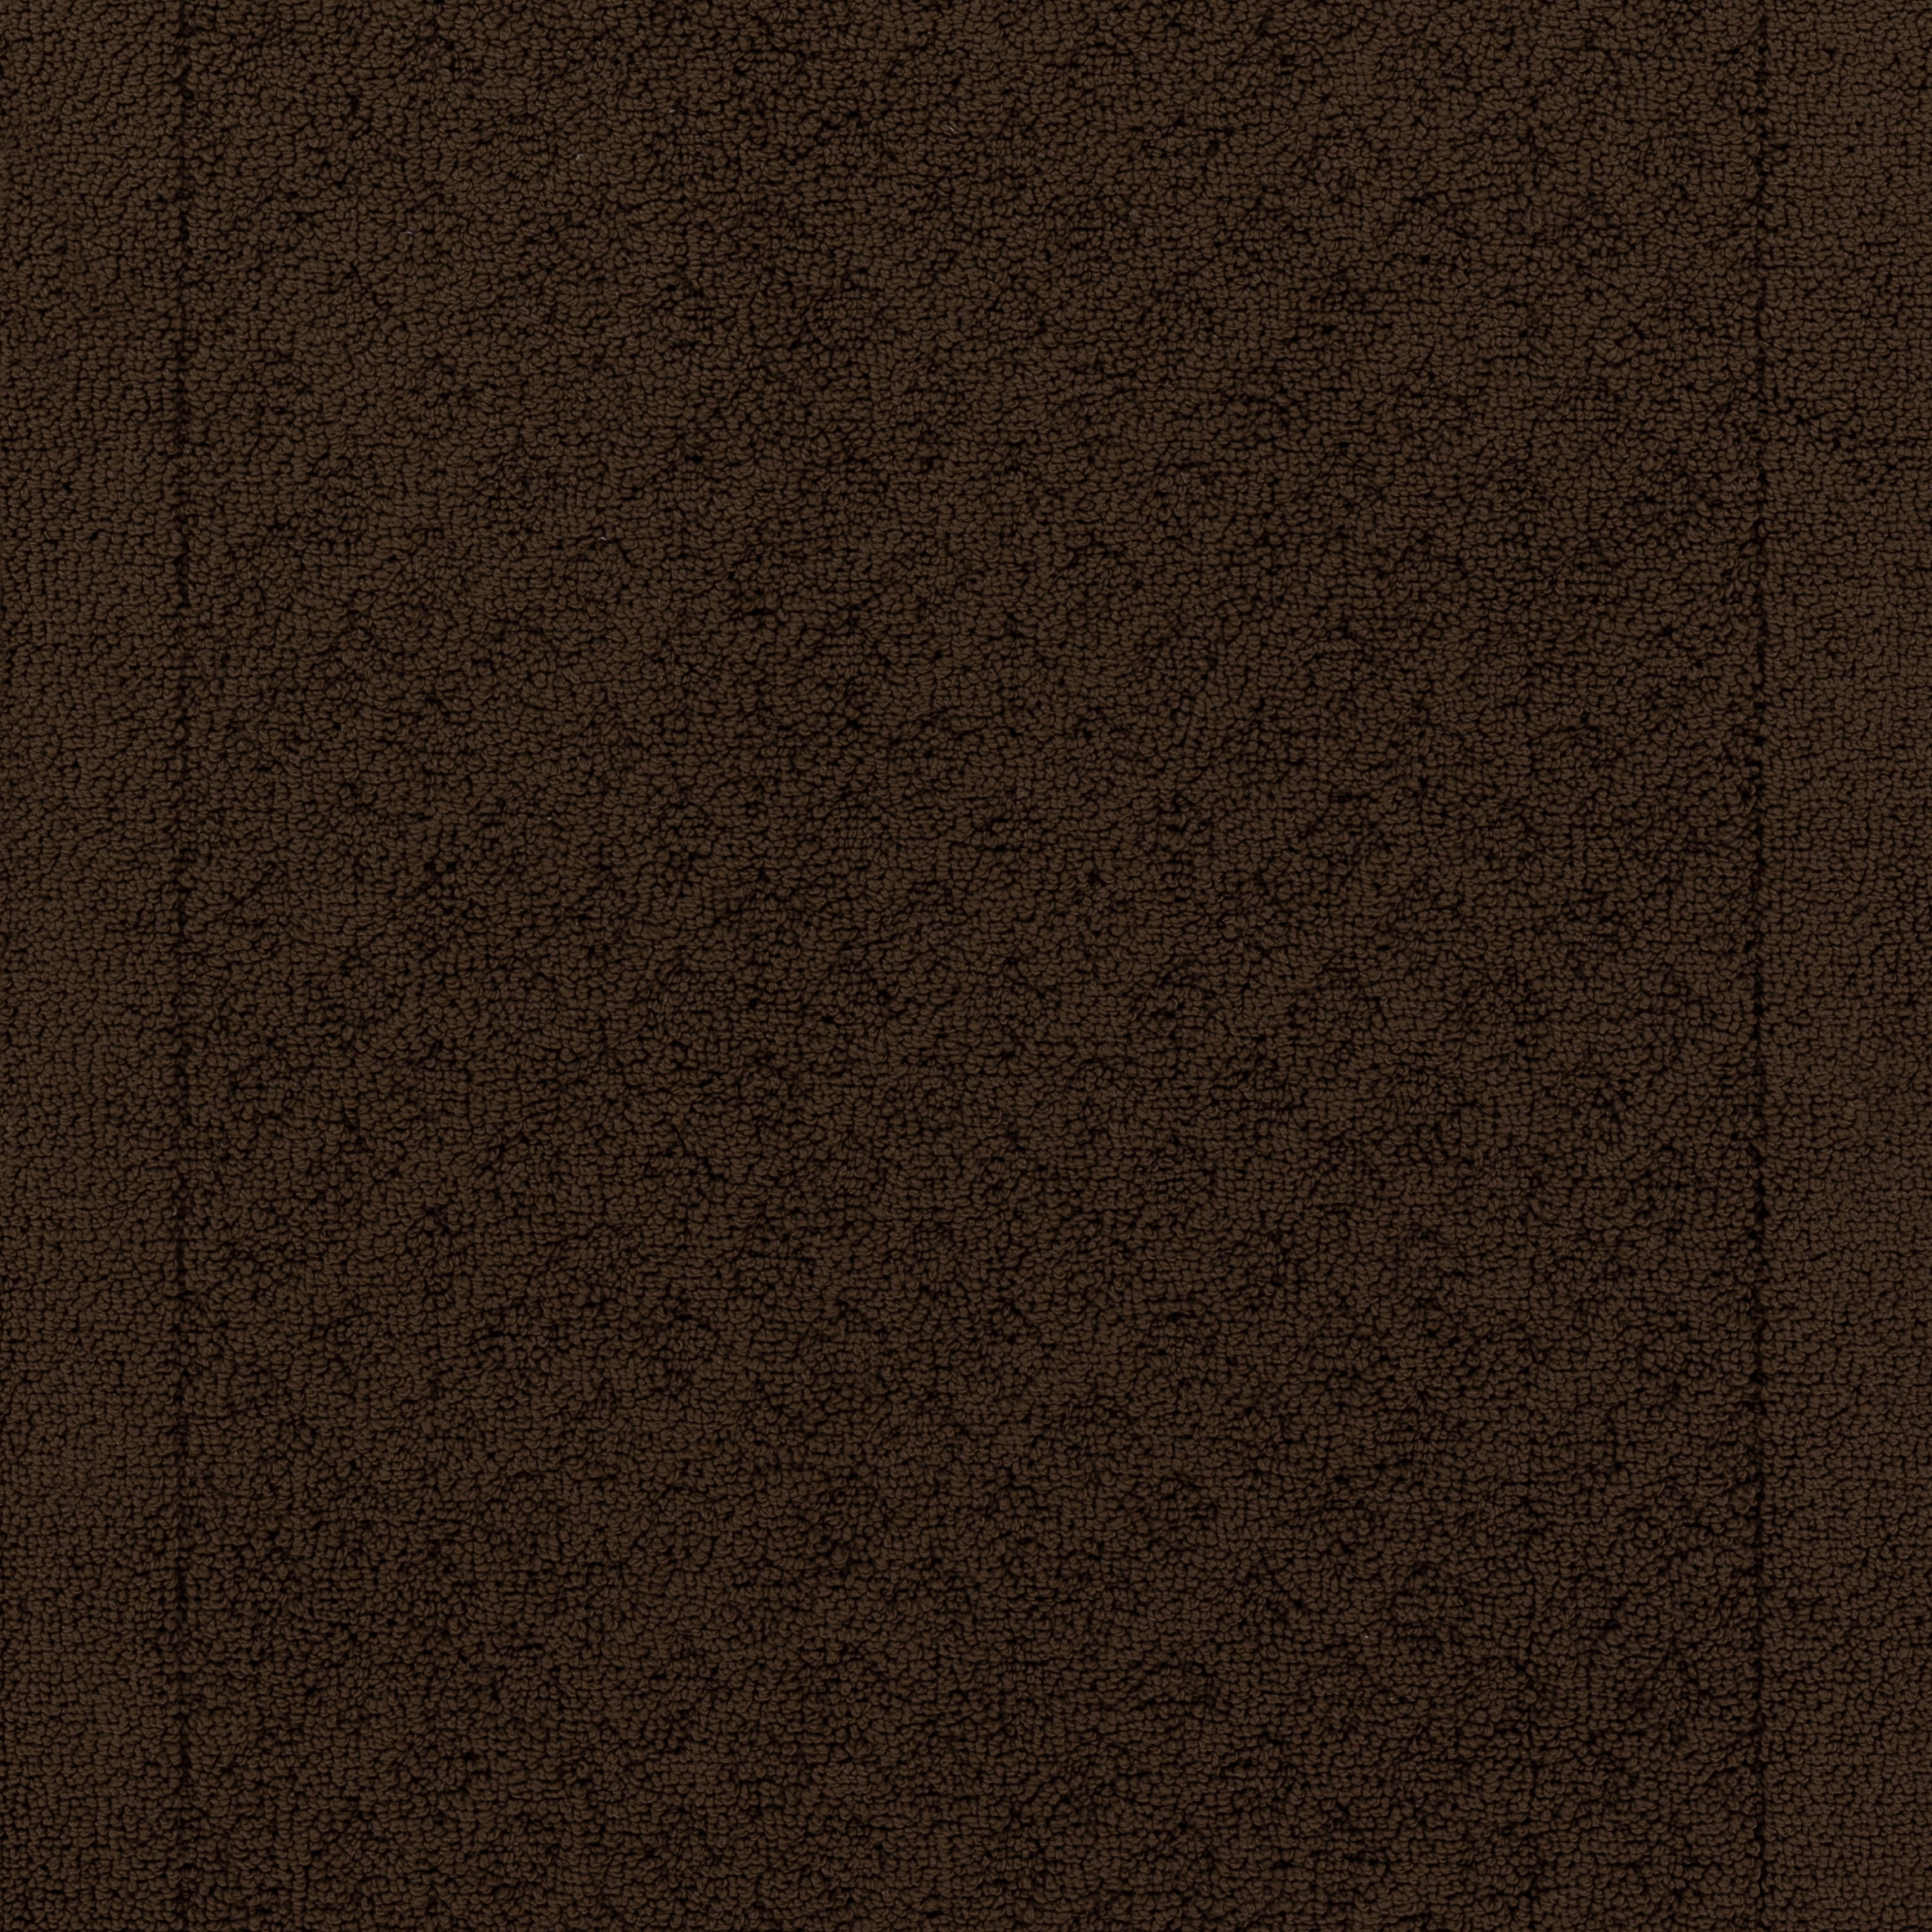  4'x45' - Rock Brown Multi - Indoor/Outdoor Area Rug Carpet,  Runners & Stair Treads with a Light Weight Latex Backing : Home & Kitchen